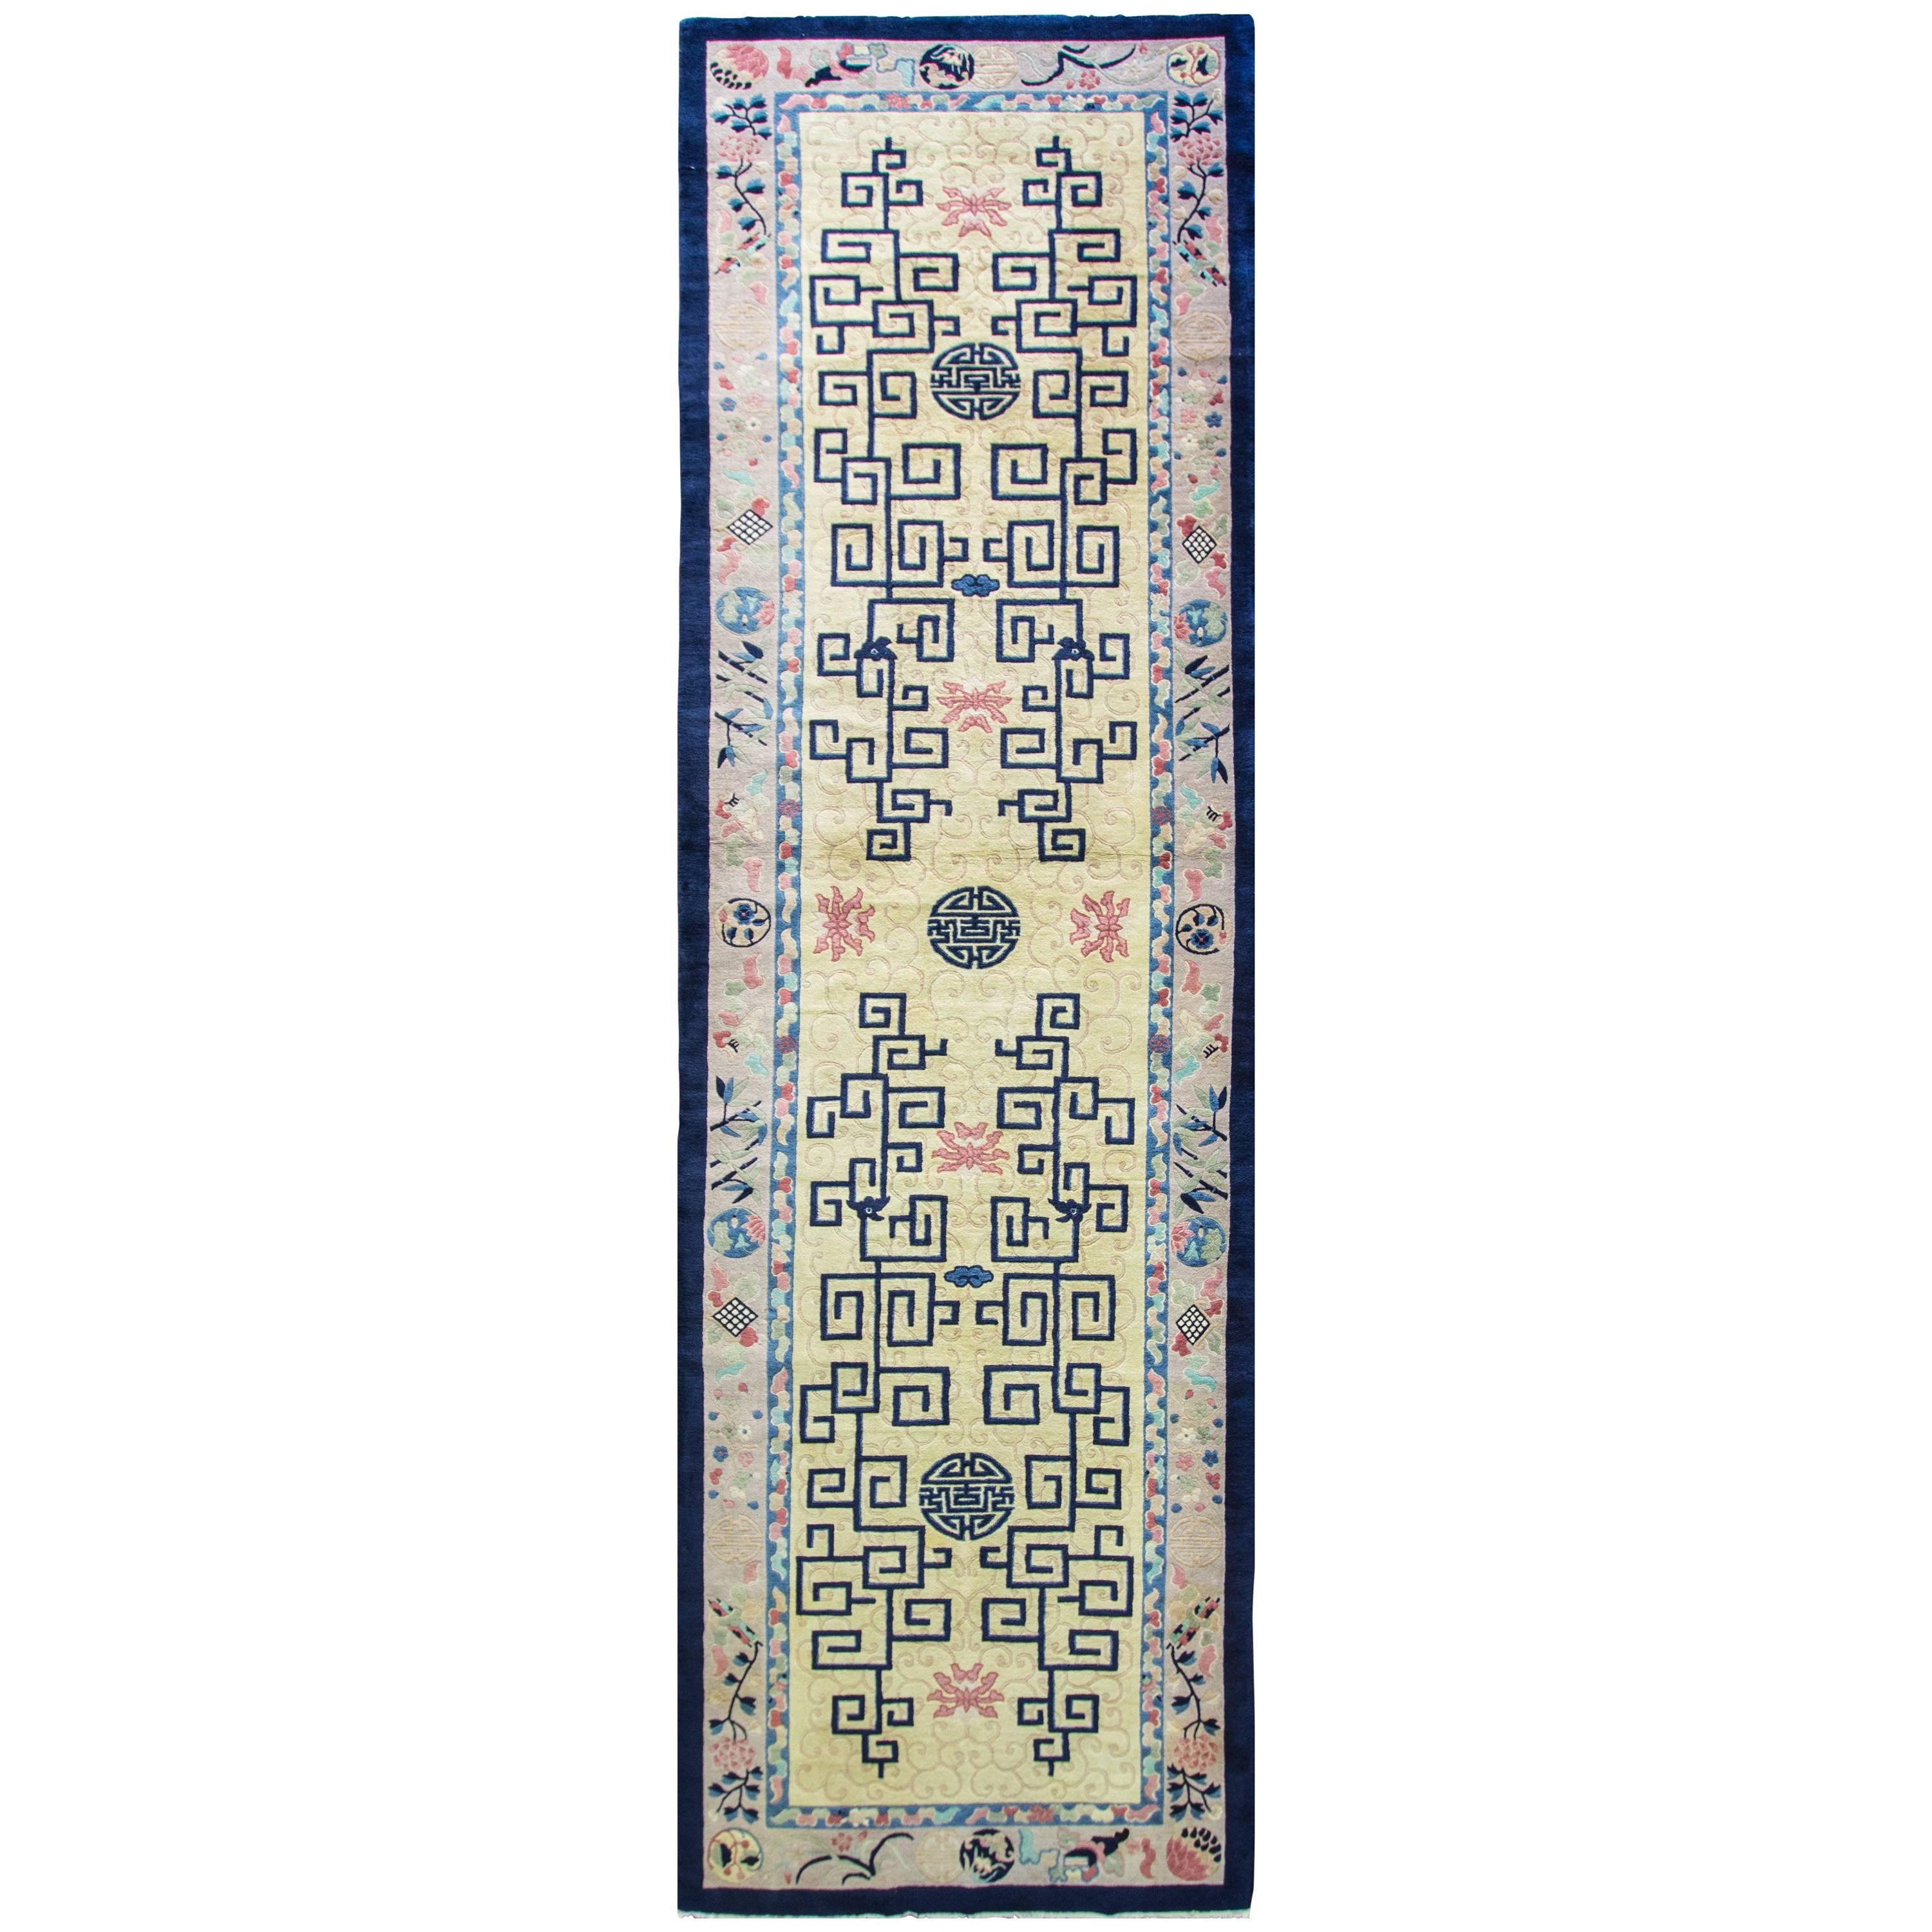 Antique Art Deco Chinese Runner Or Gallery Size Carpet, 5'2" x 17'10"